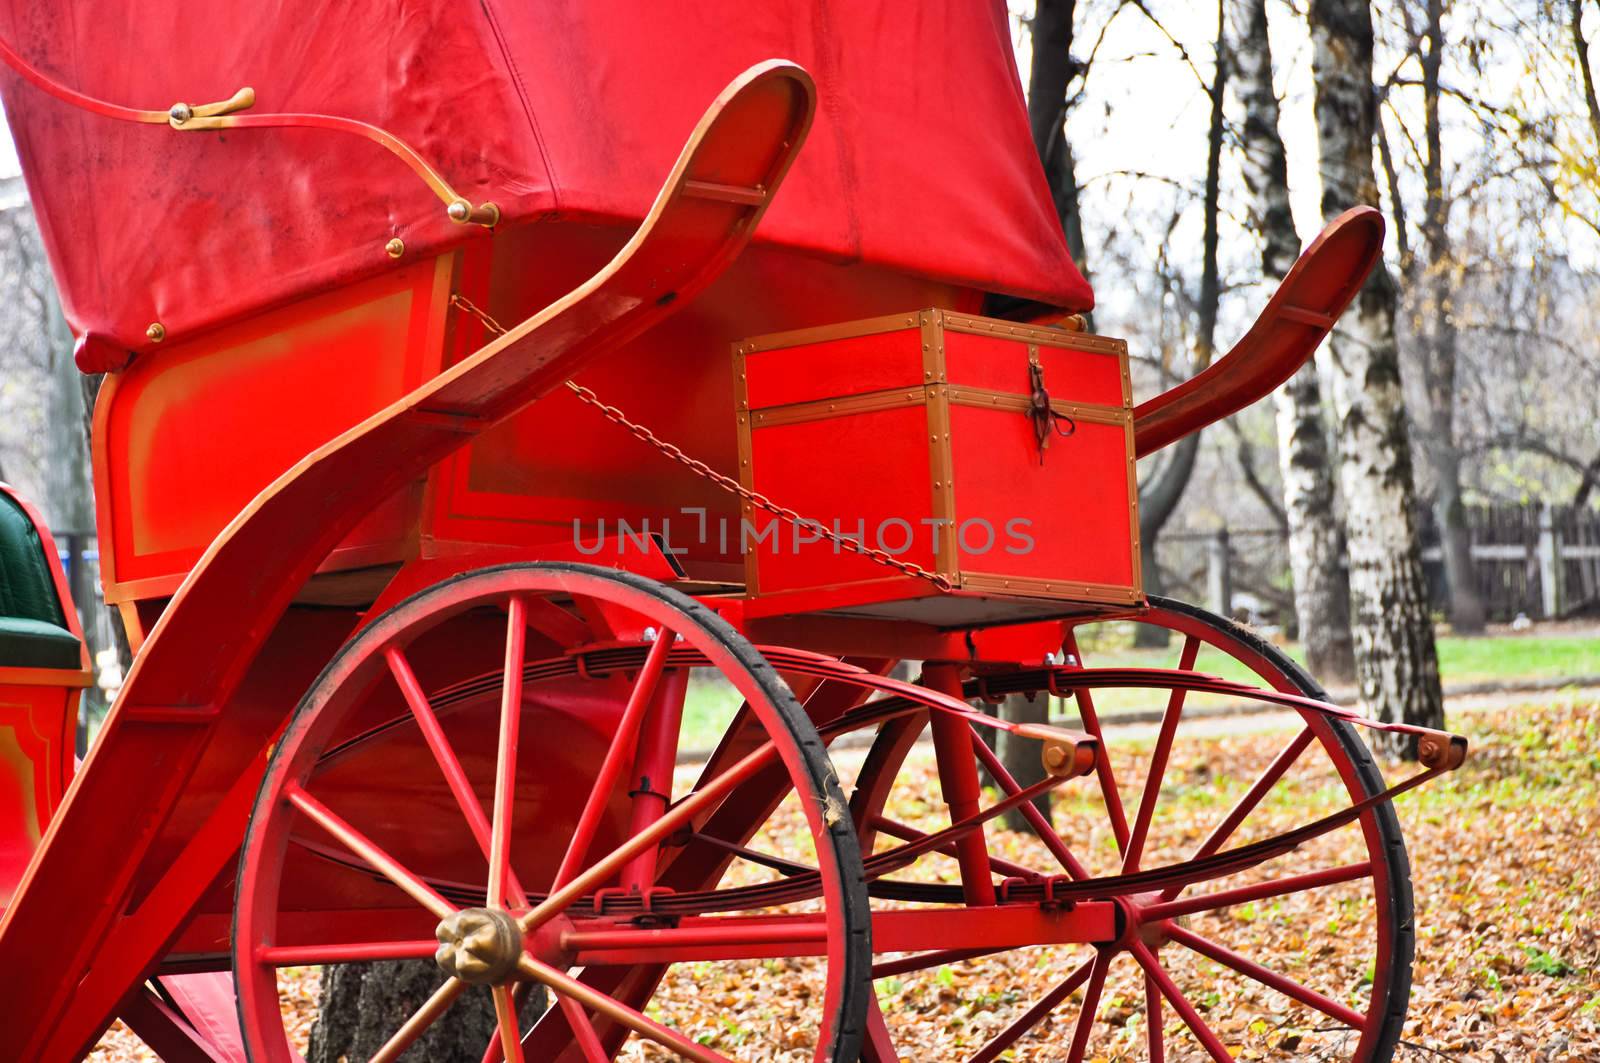 details of the red horse carriages